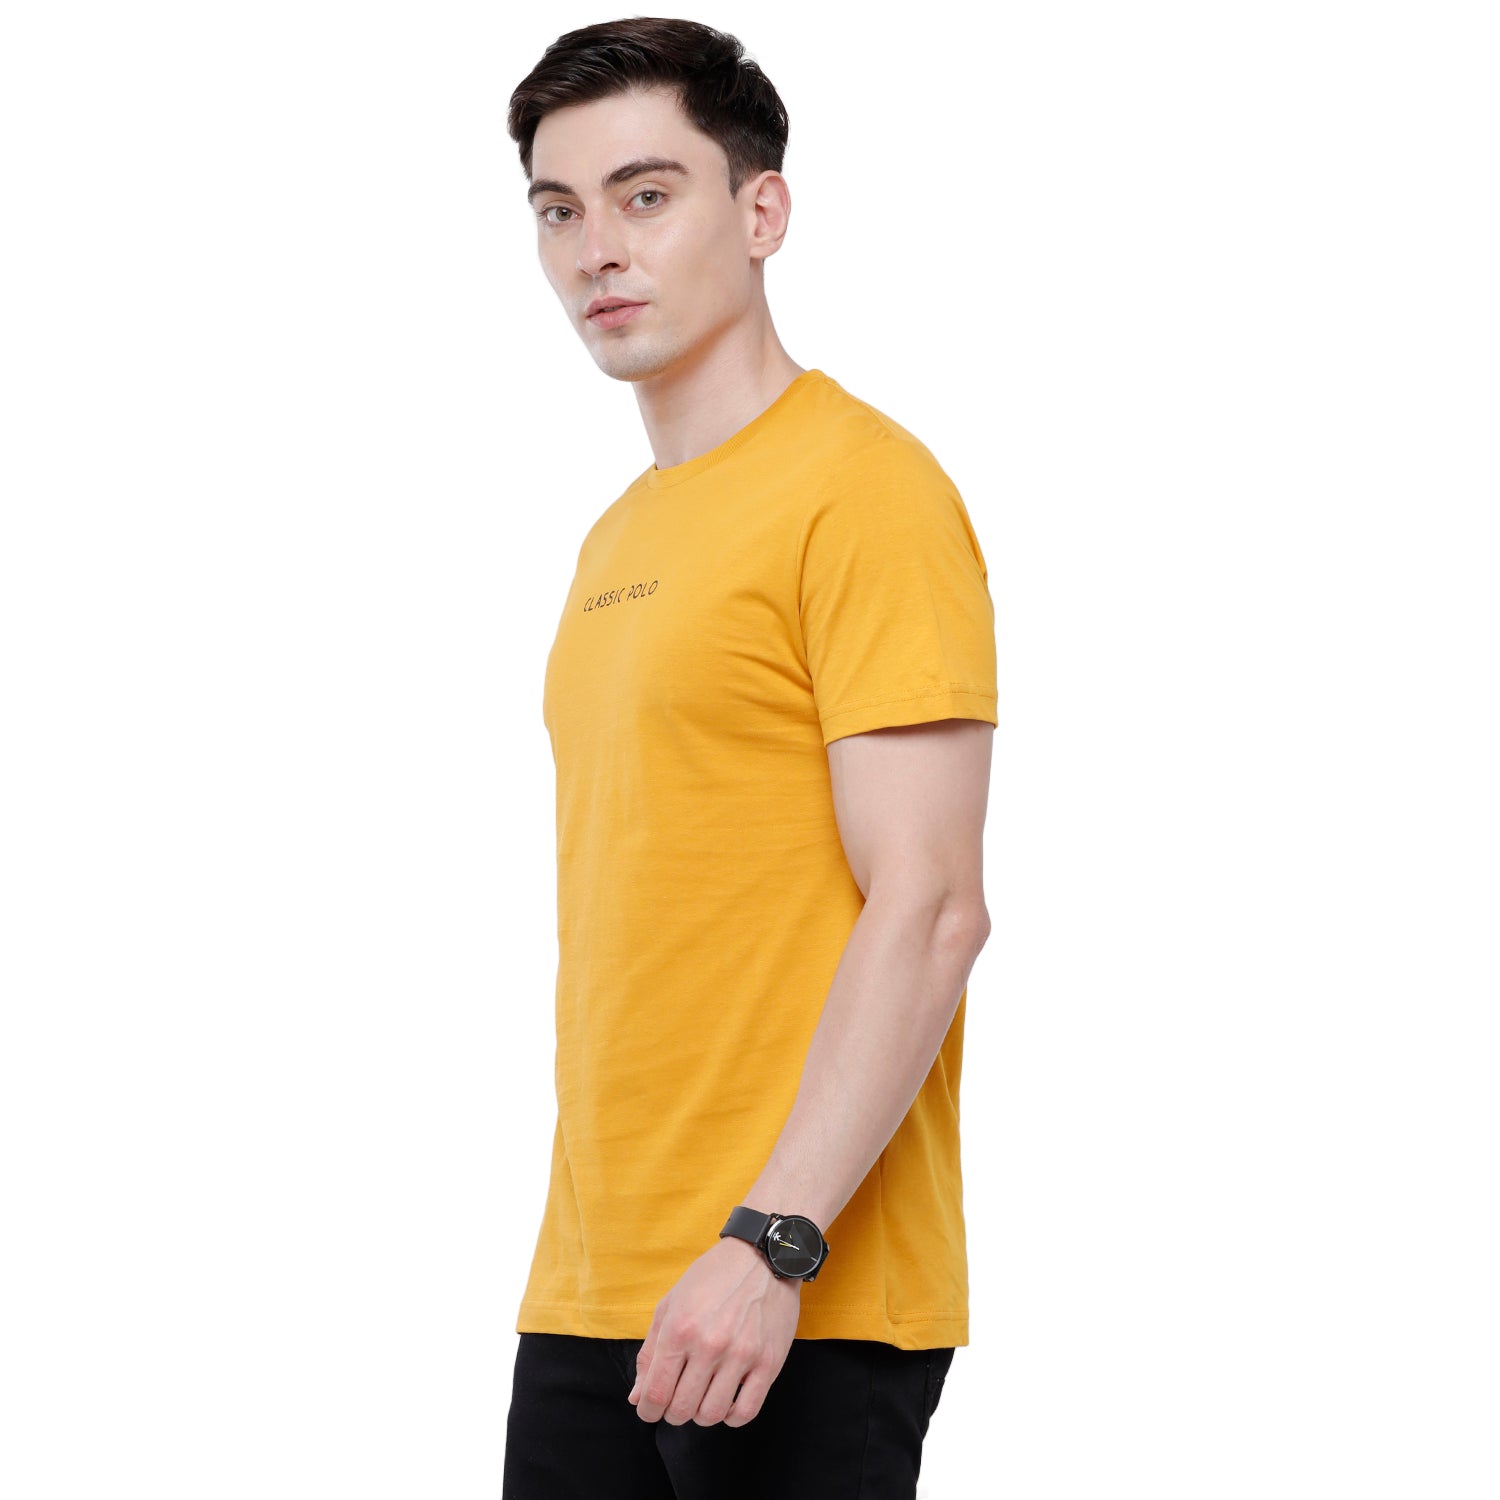 Classic polo Men's Basic Solid Single Jersey Crew Half Sleeve Slim Fit T-Shirt ( Trio Pack) - Ceres - 06 Classic Polo 